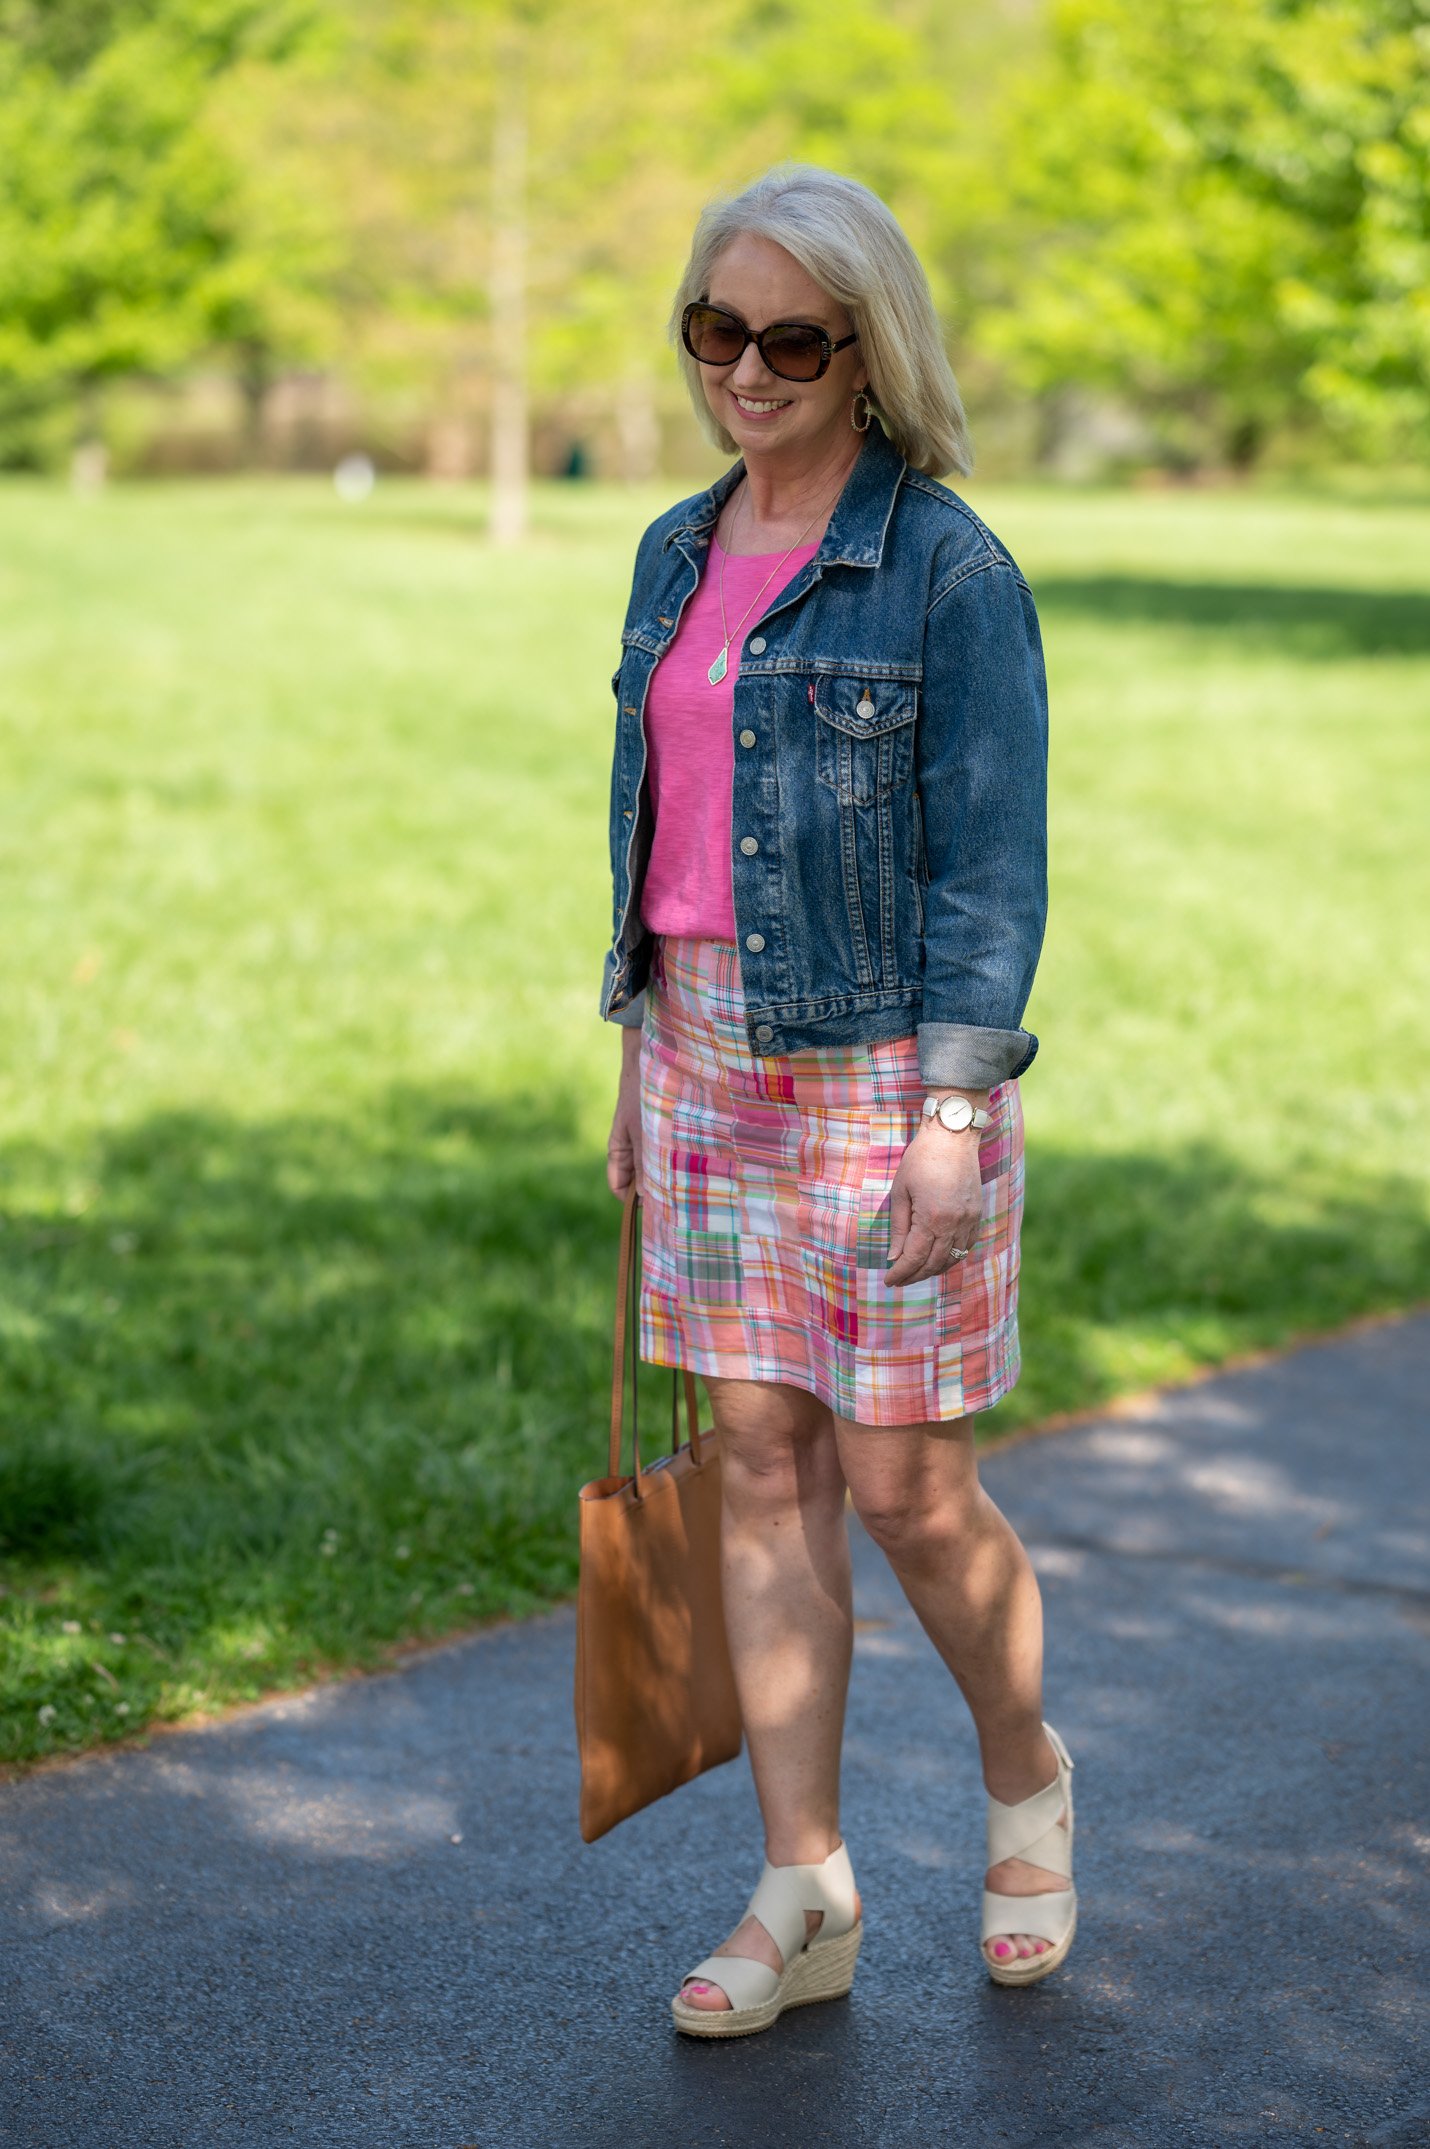 Colorful A-Line Skirt with Pink Top